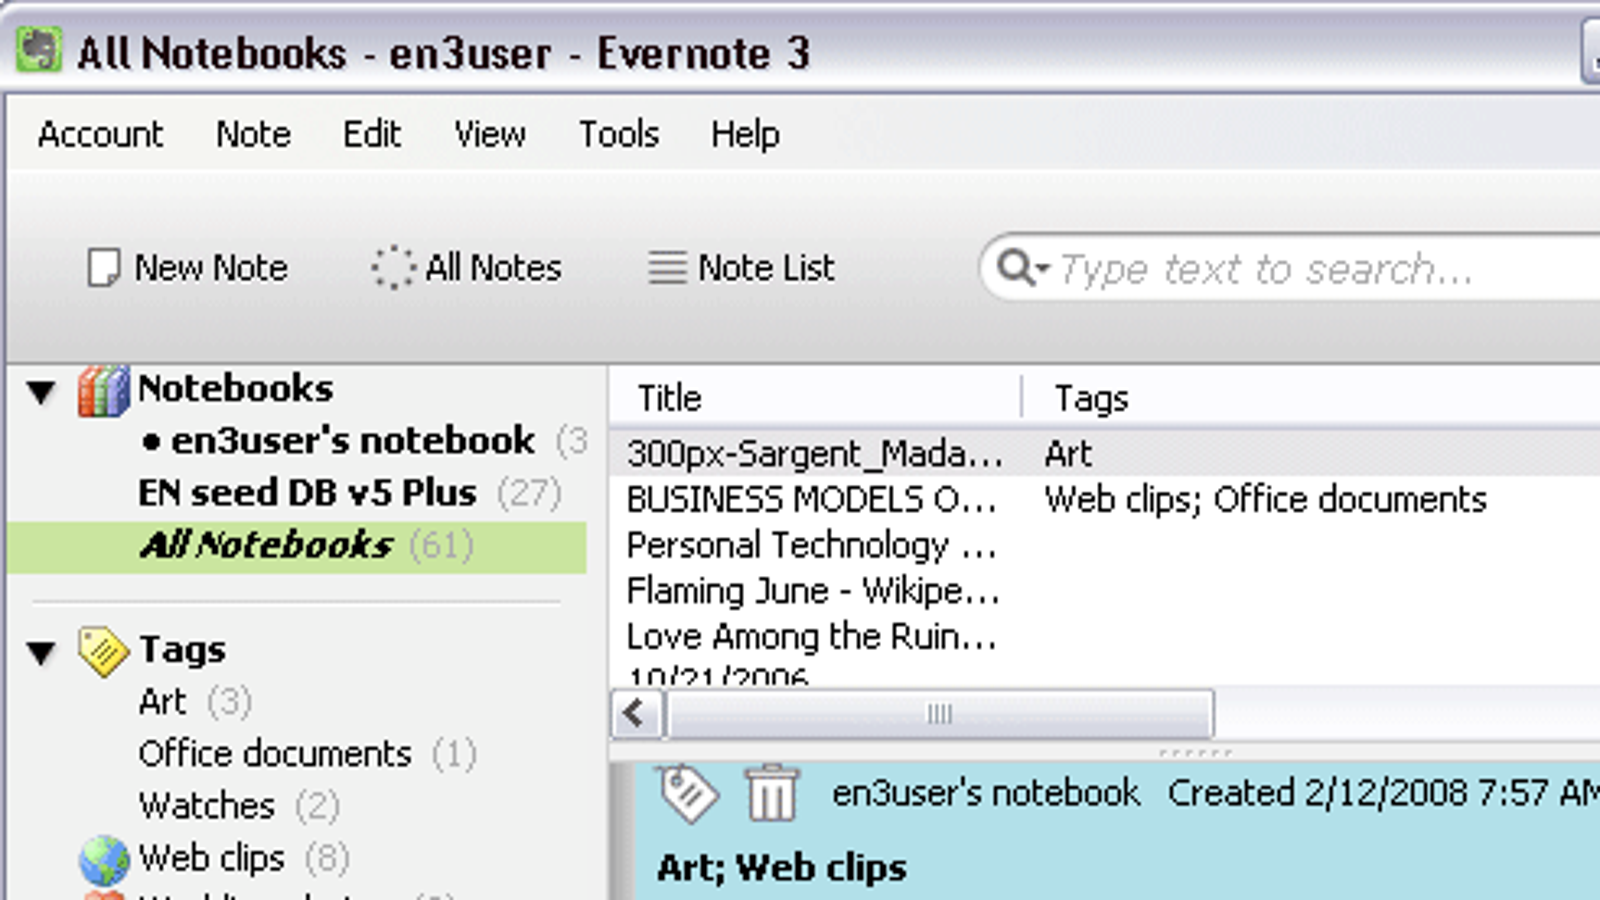 evernote mac os x download